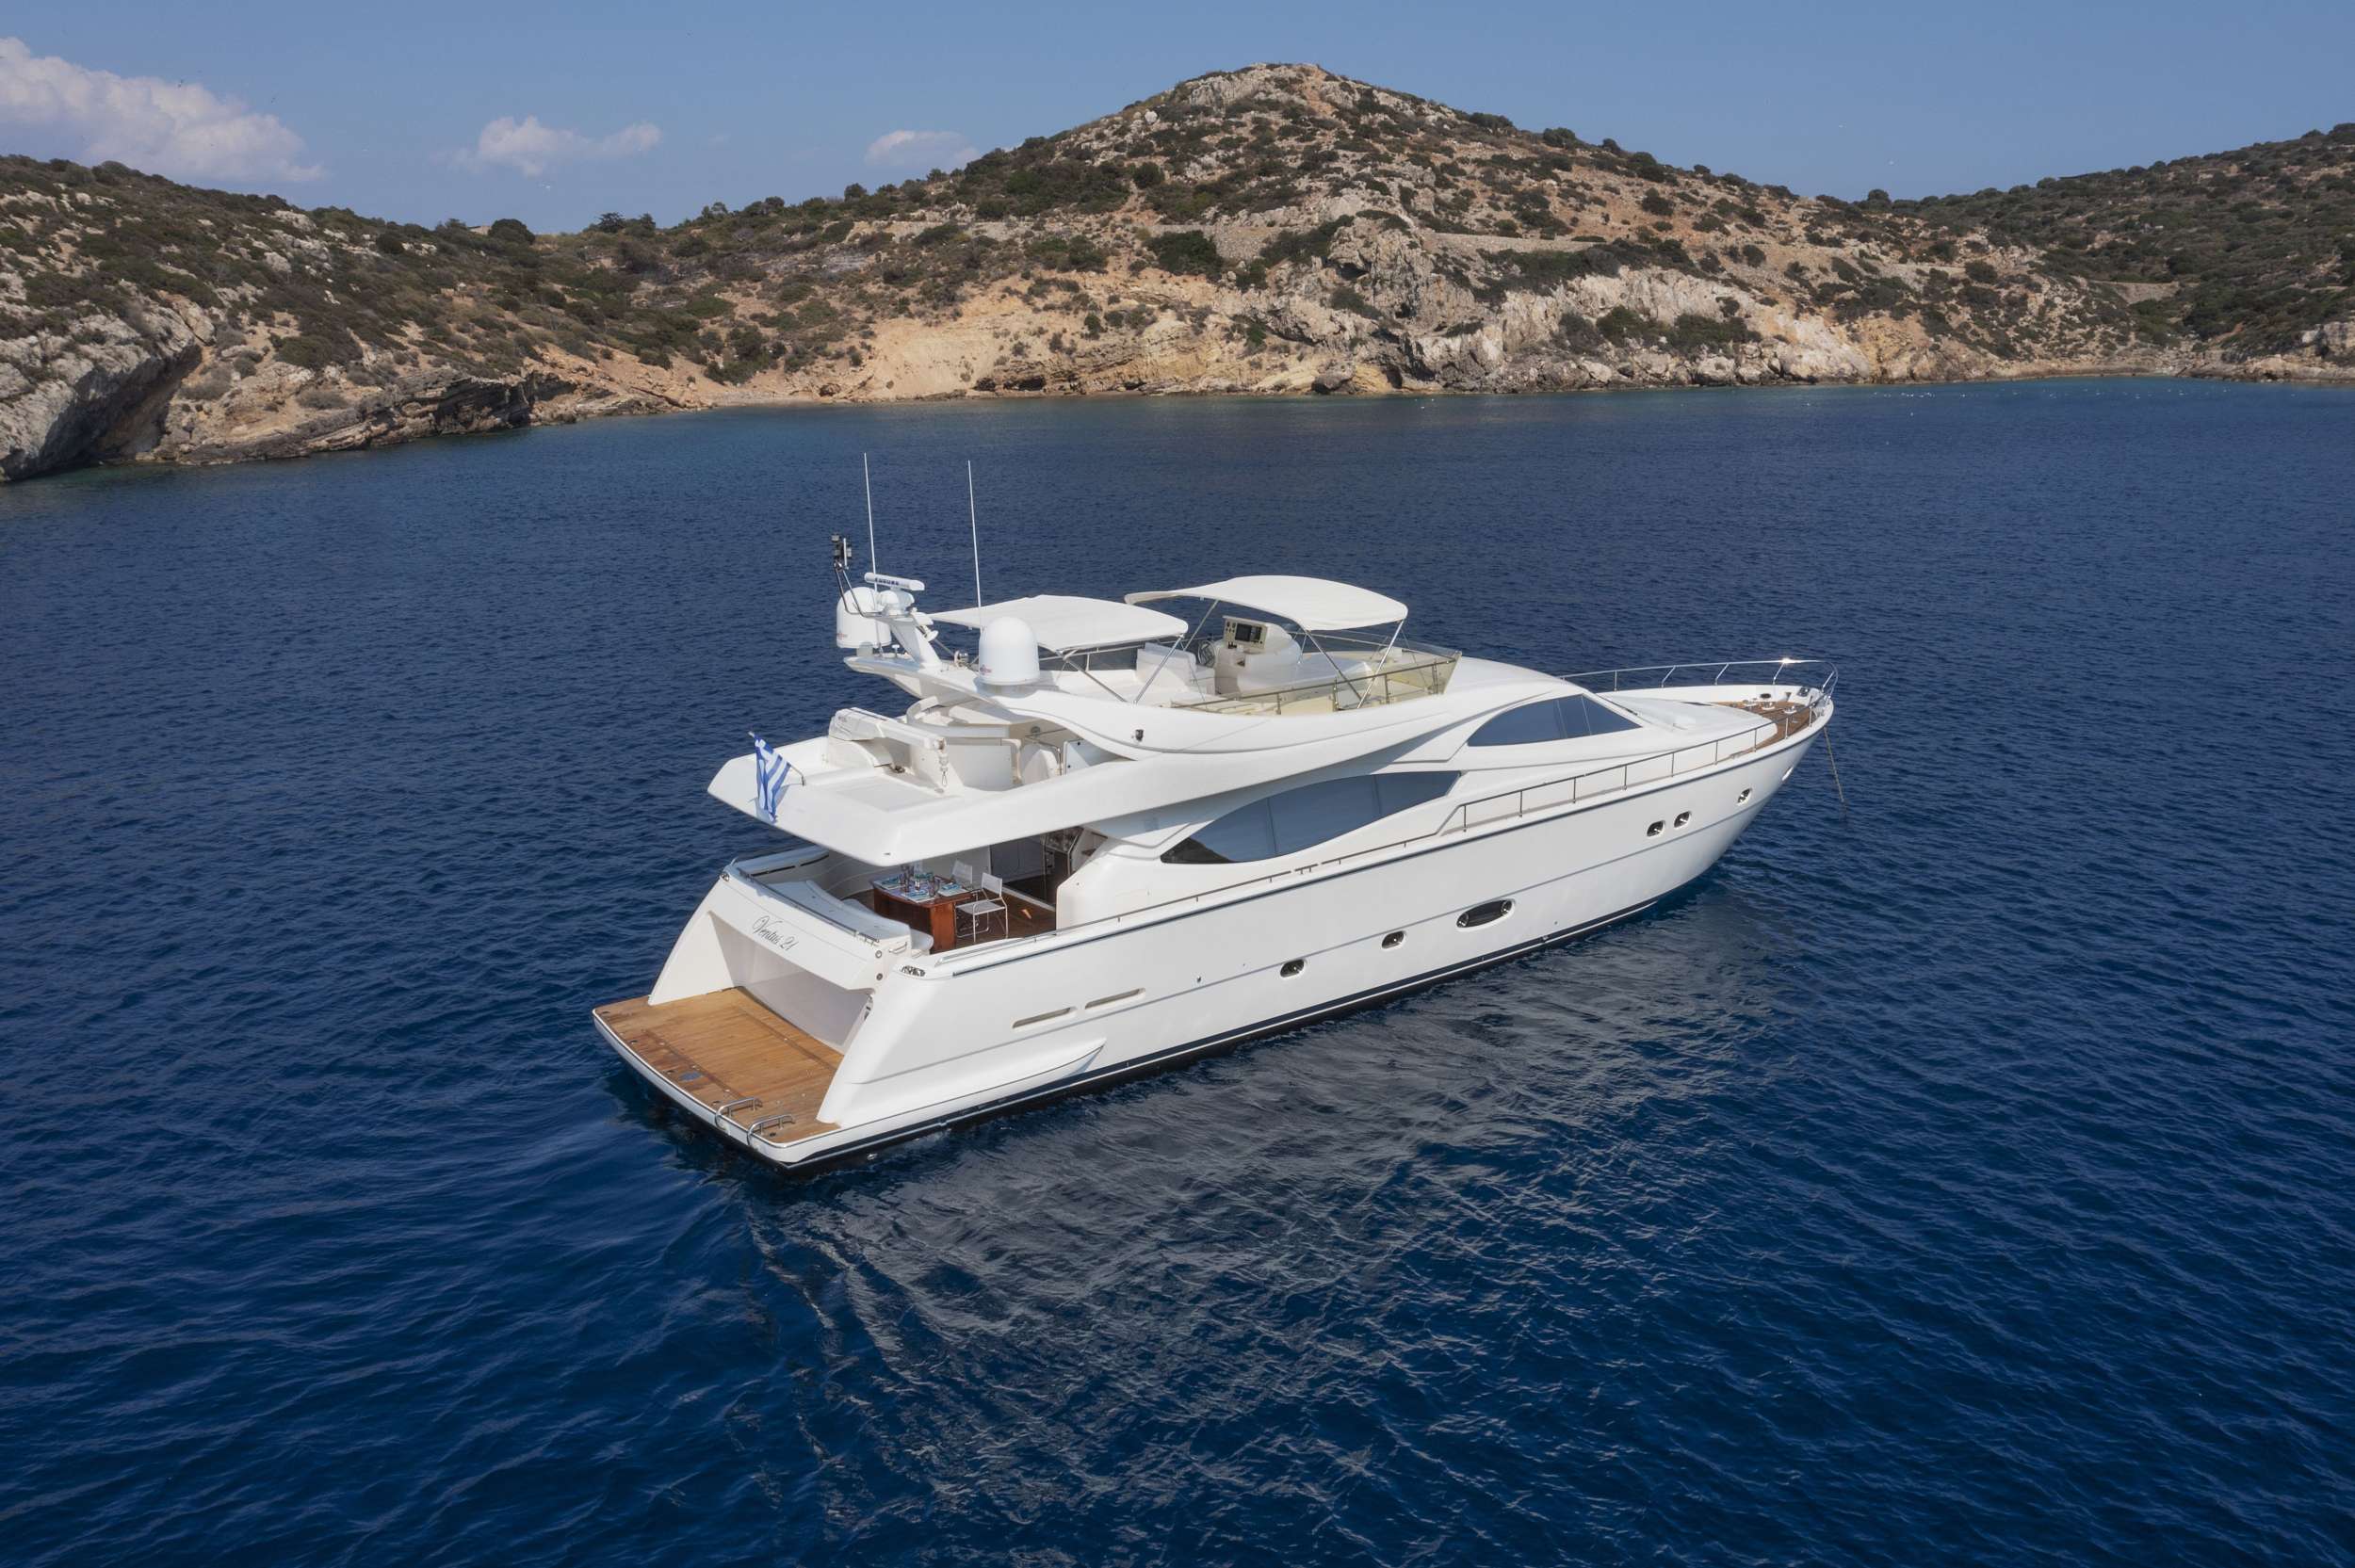 Ventus 21 - Yacht Charter Corinth & Boat hire in Greece 1